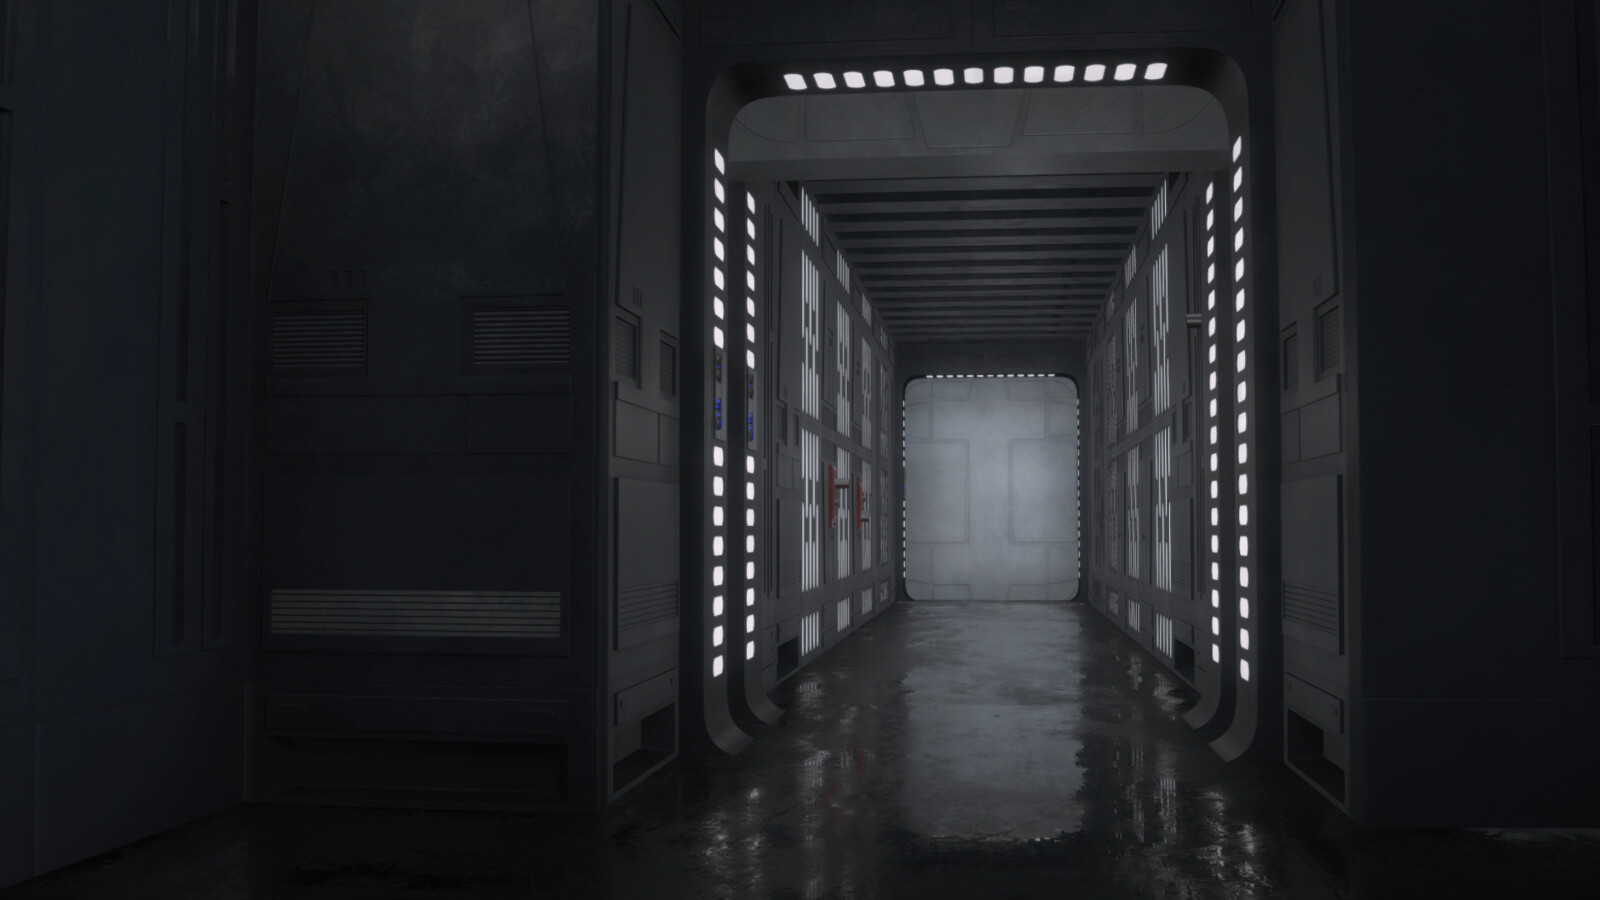 Some early test shots I did of the corridor environments I modeled for the film. 